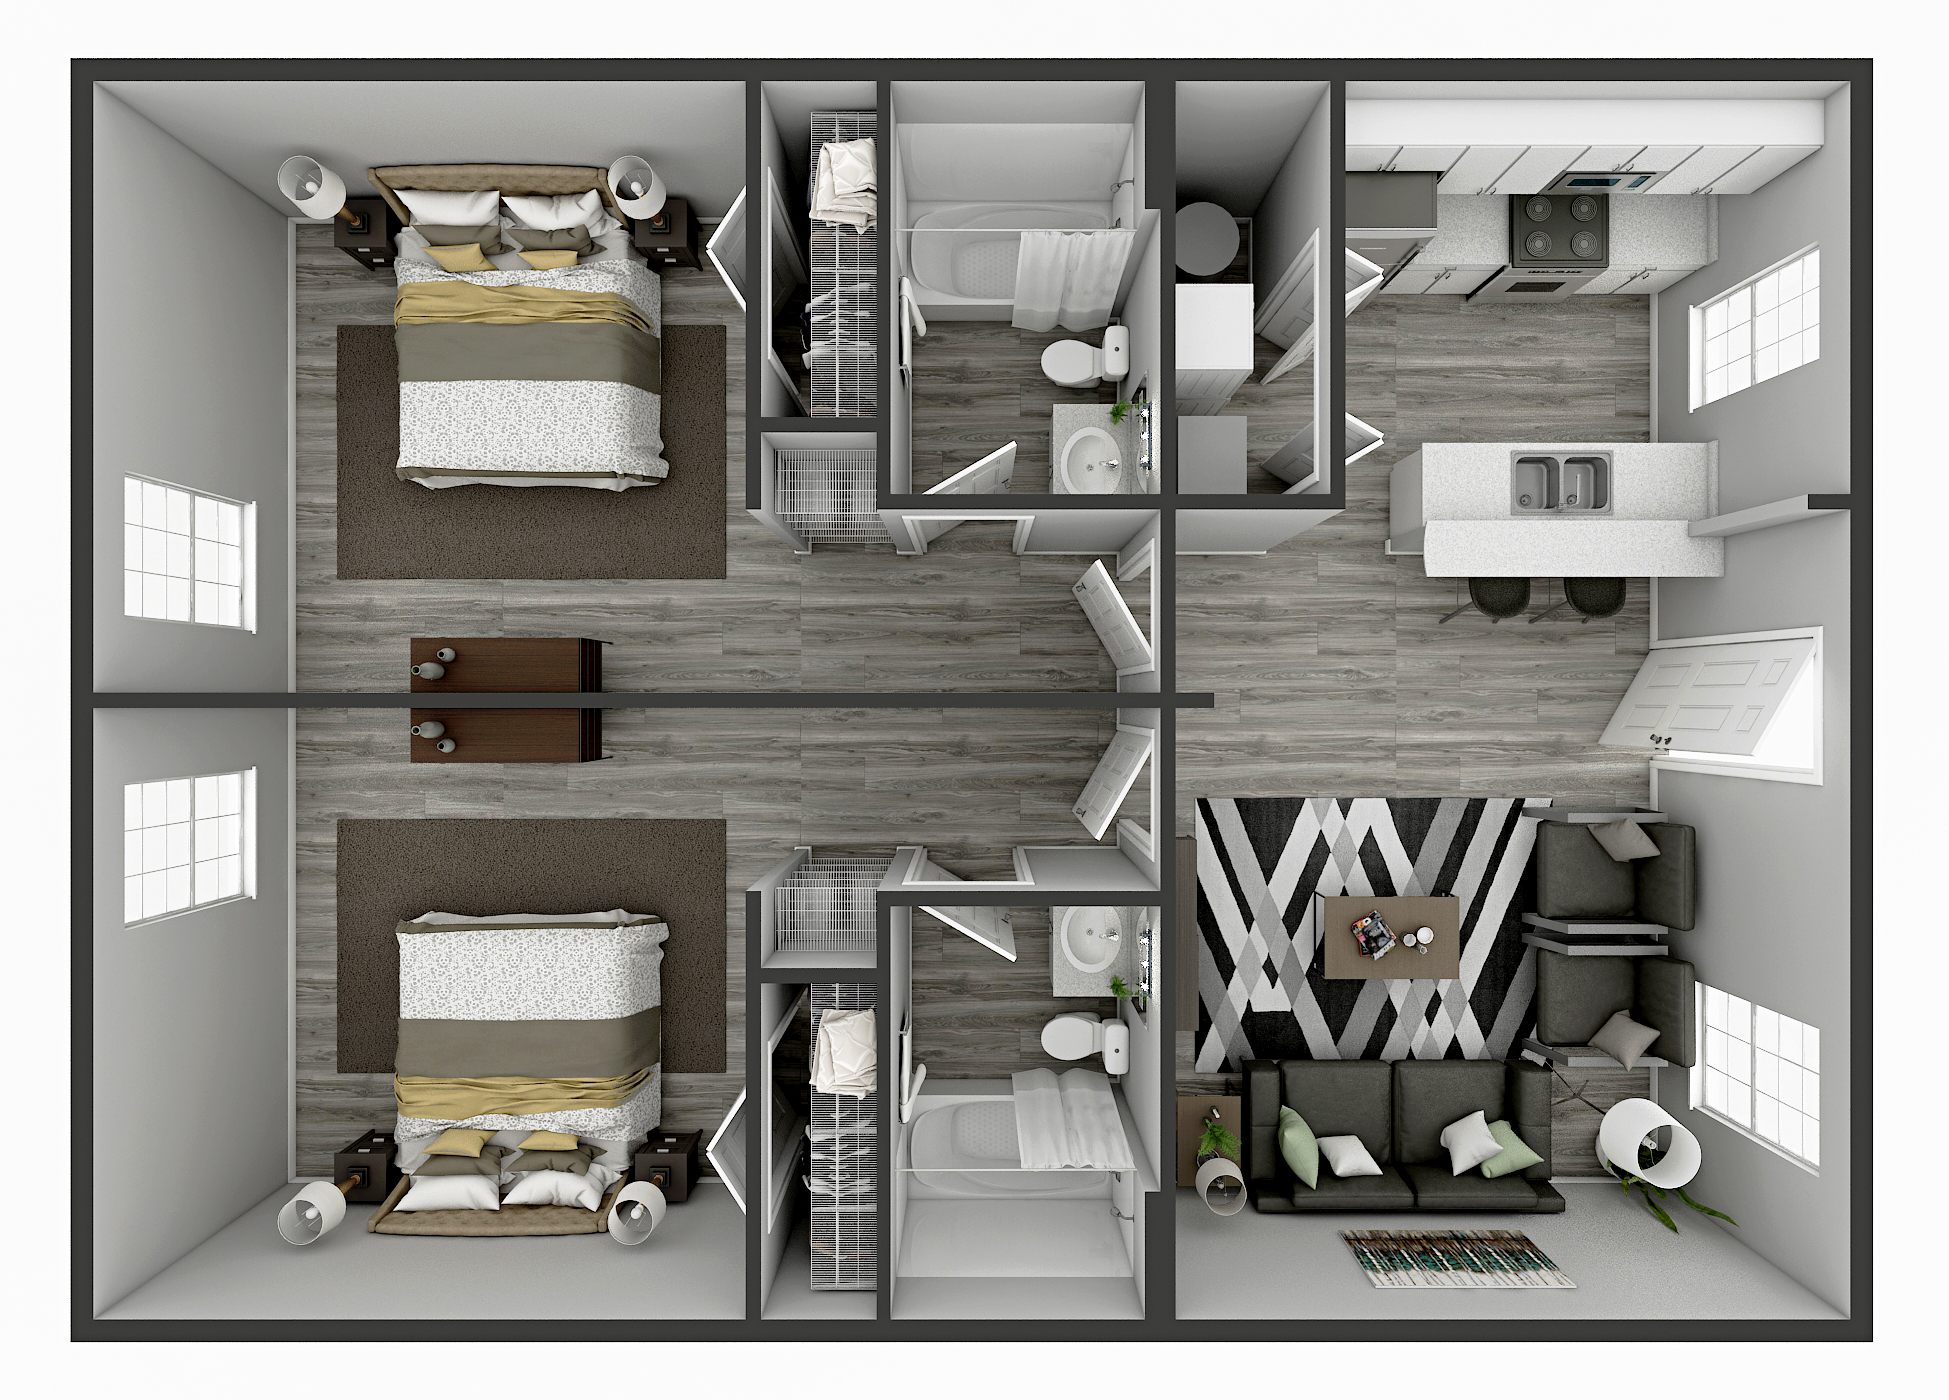 Floorplan of 2 bedrooms and 2 baths of Elevate on Cascade in Tallahassee, Florida